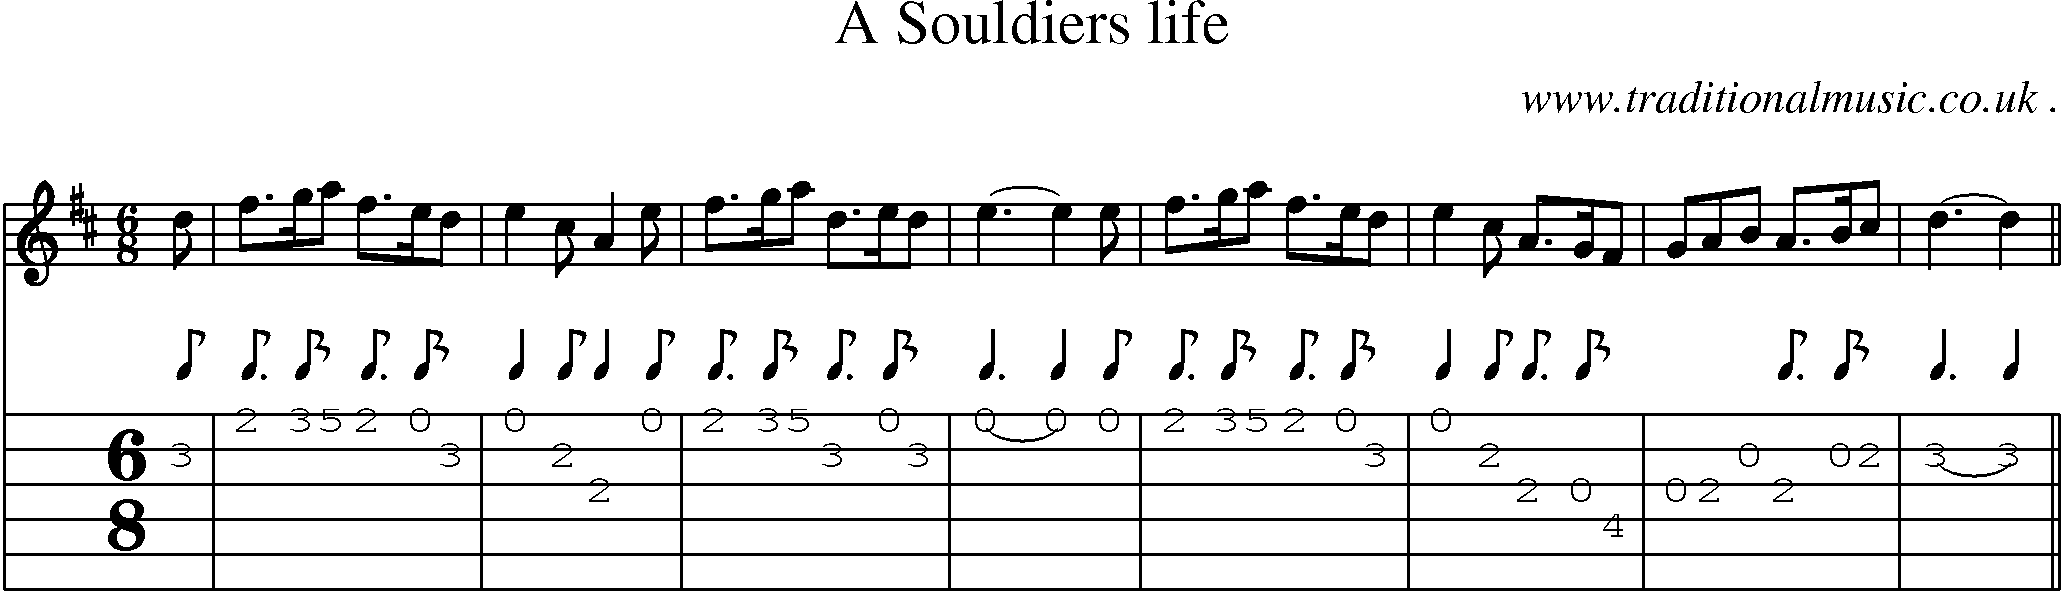 Sheet-Music and Guitar Tabs for A Souldiers Life